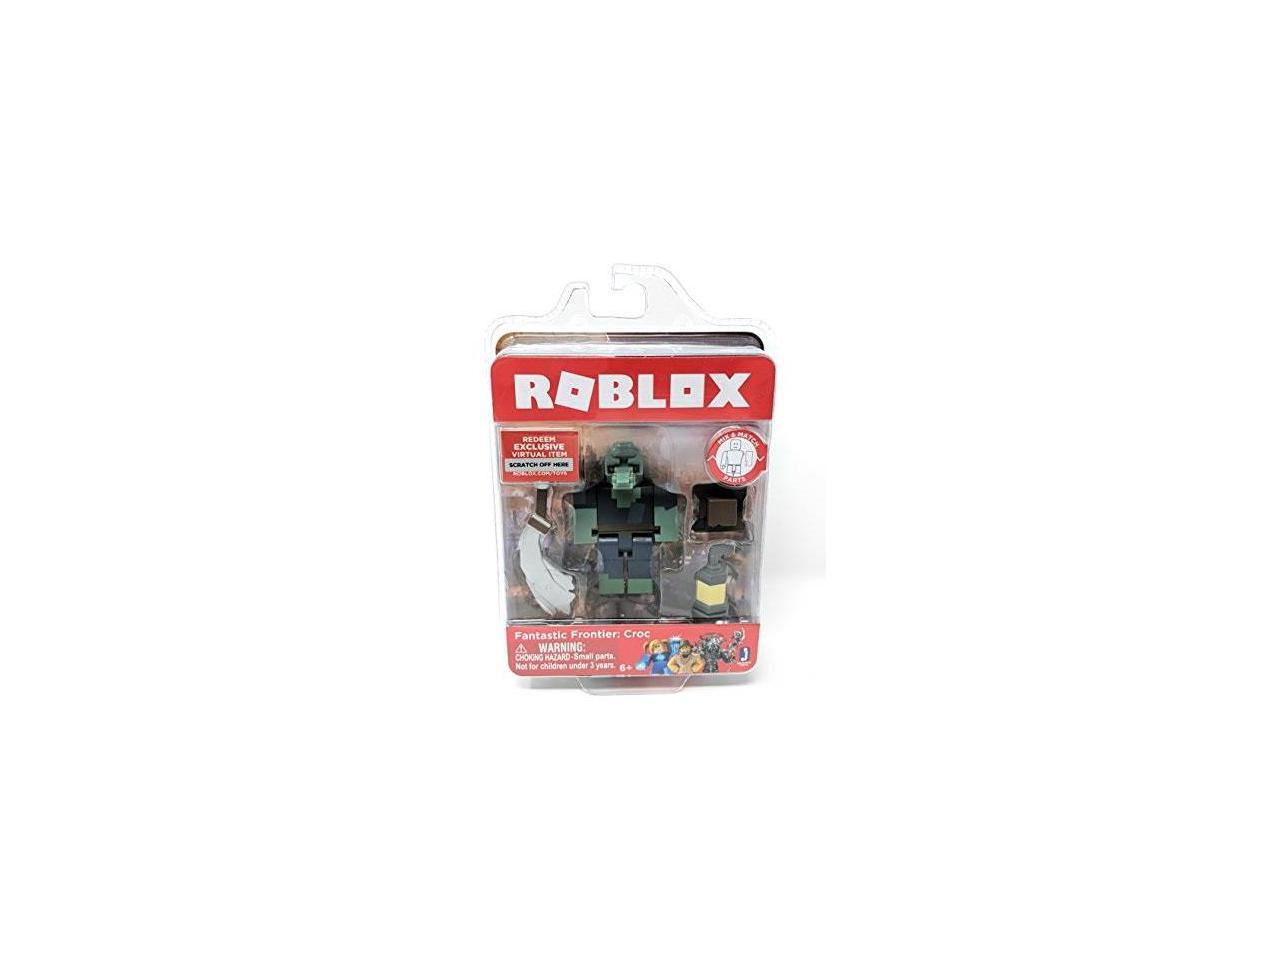 Roblox Fantastic Frontier Croc Single Figure Core Pack With Exclusive Virtual Item Code Newegg Com - roblox fantastic frontier croc